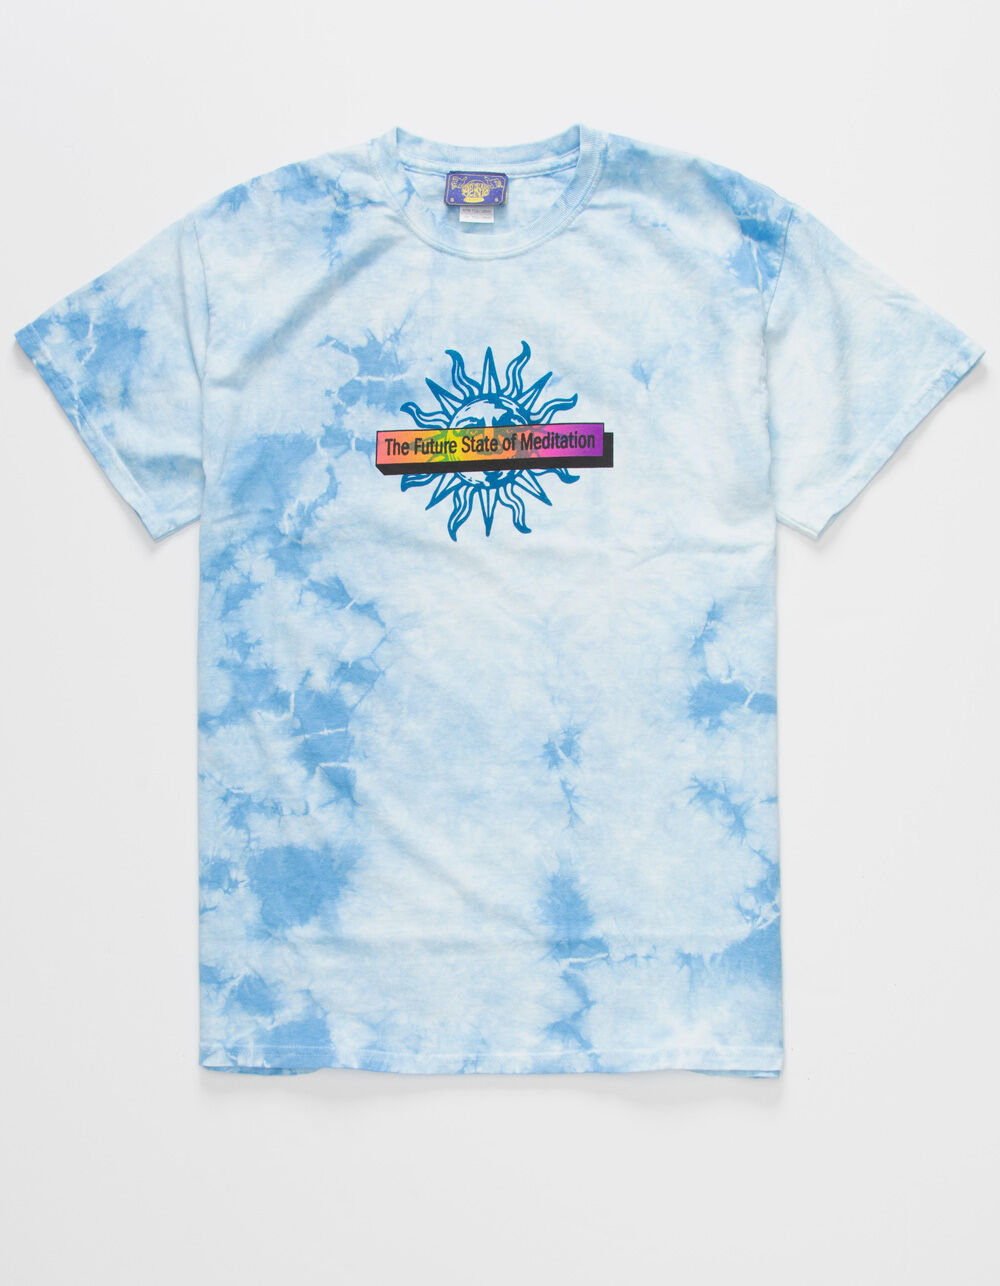 CONEY ISLAND PICNIC Relax Your Mind Mens Tee - BLUE COMBO | Tillys